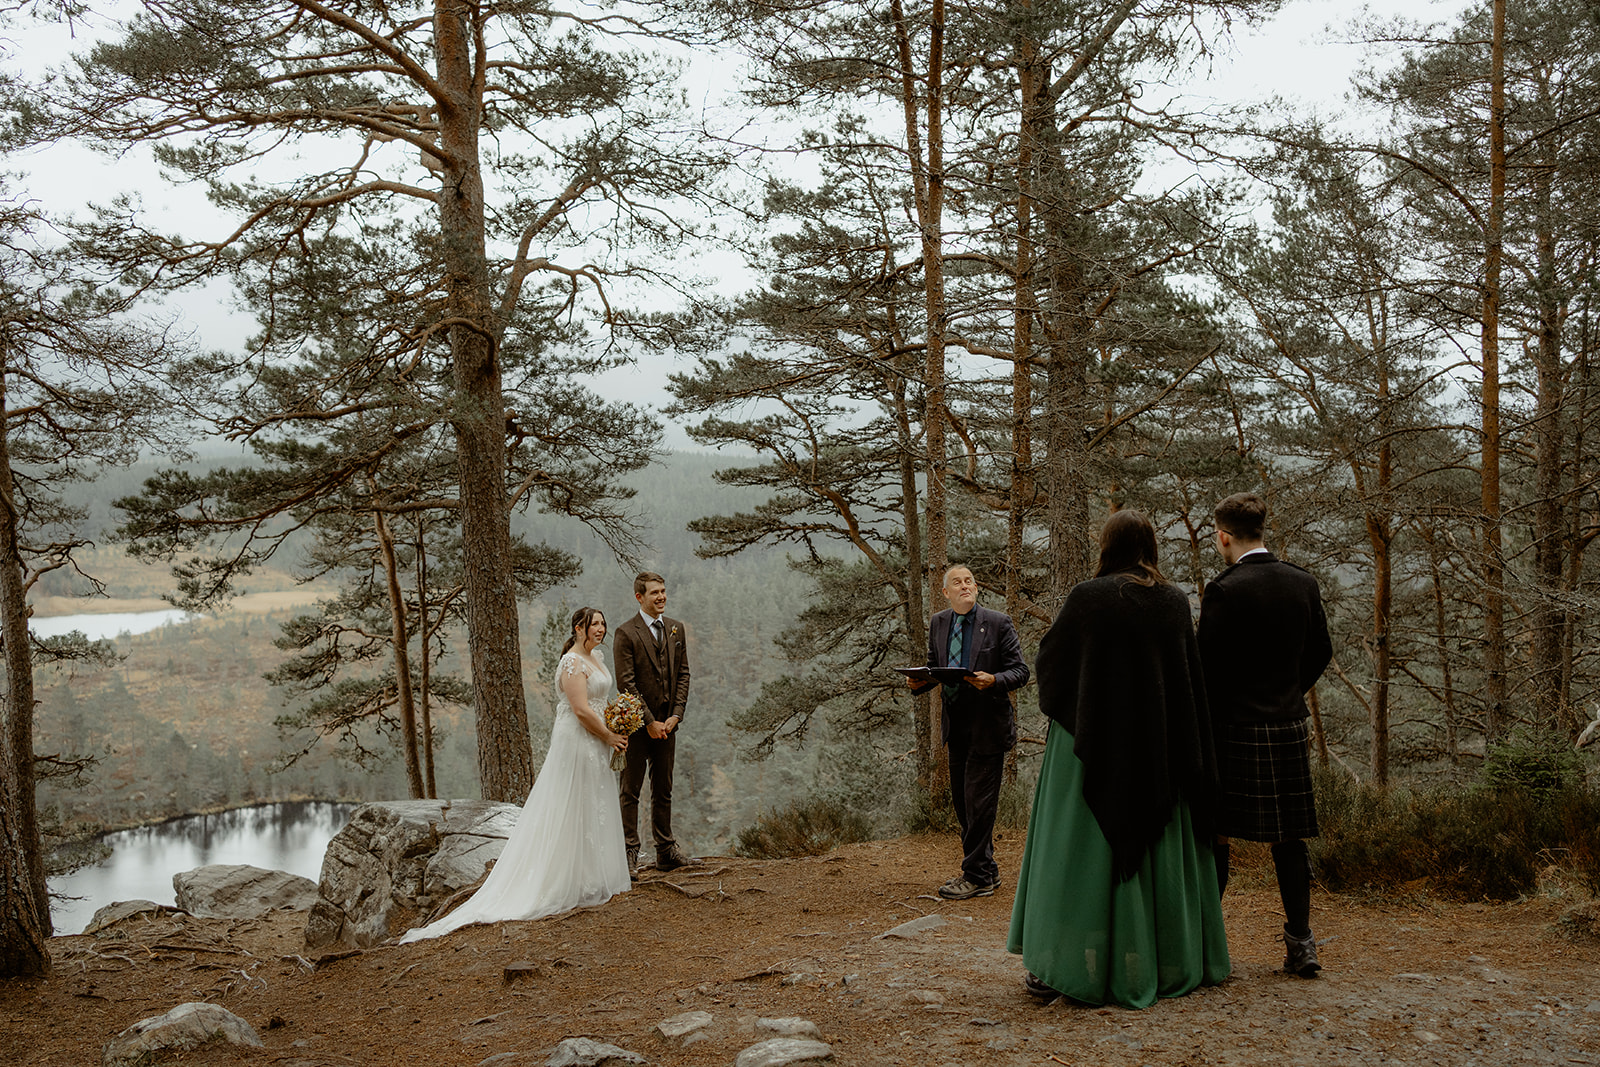 Small Humanist Ceremony with couple getting married amongst the trees with mountains and lochs in the background.